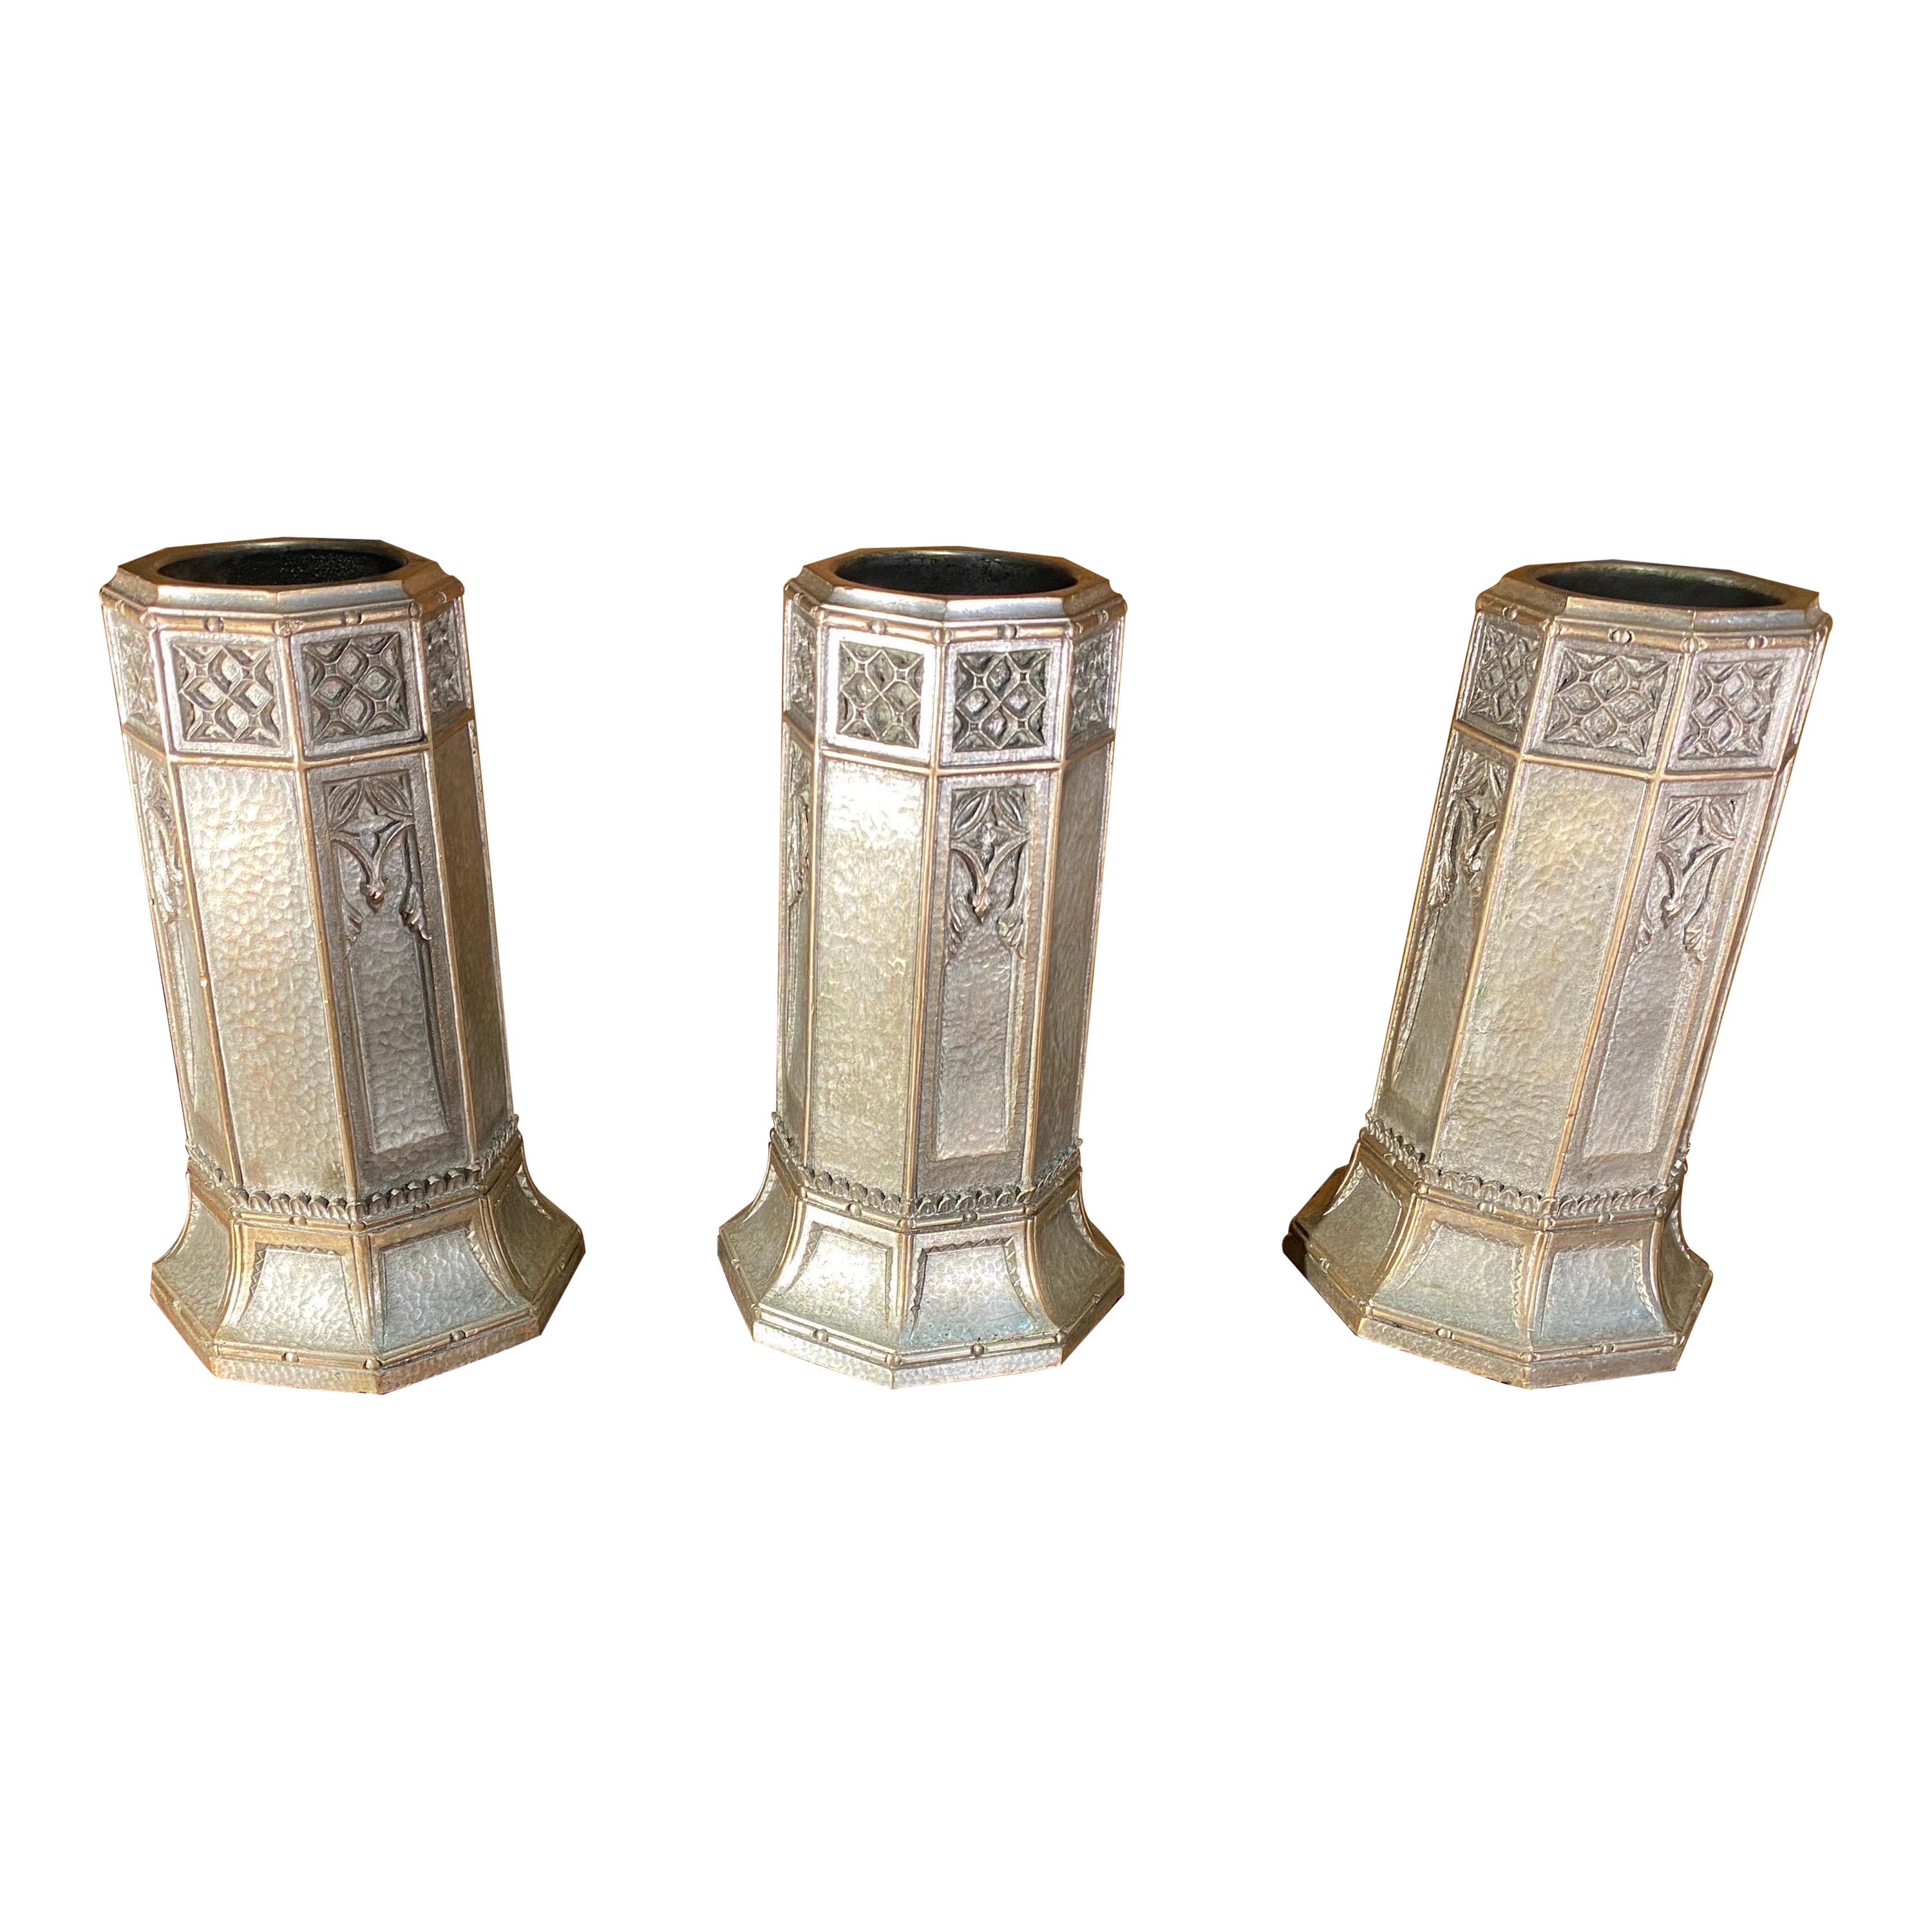 Set of 3 Silvered Bronze Bud Vases from the Late 19th-Early 20th Century For Sale